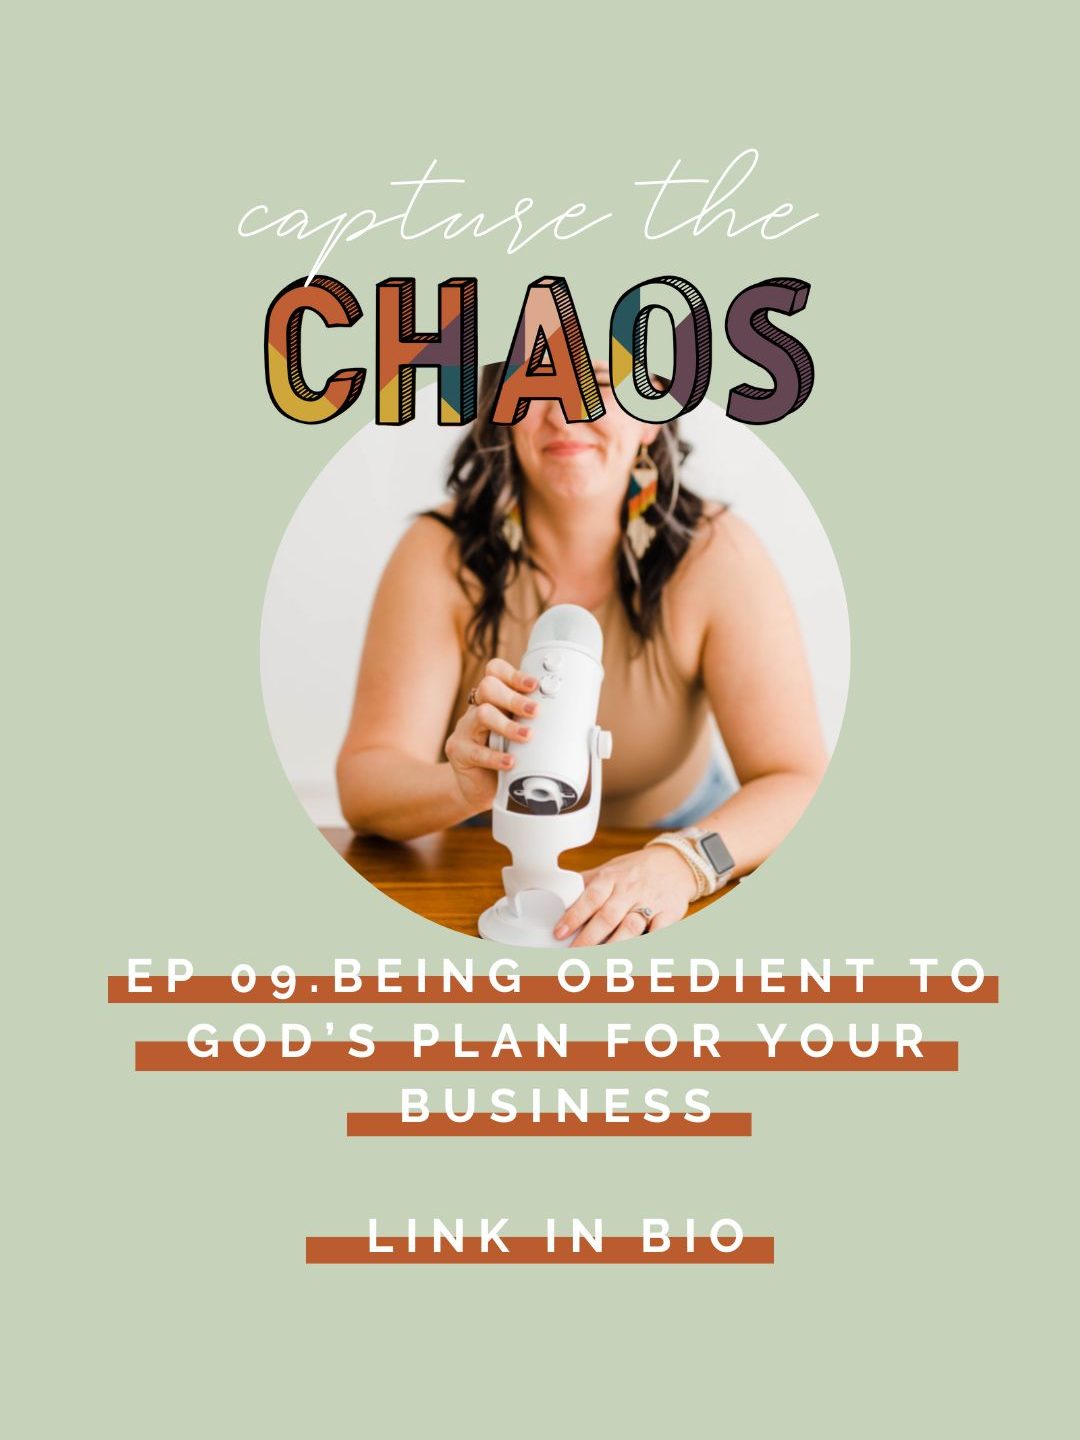 Being Obedient to God's plan for Your Business | Capture the Chaos Podcast with Brittnie Renee | family photography podcast, podcast for photographers, business tips for photographers | via brittnierenee.com